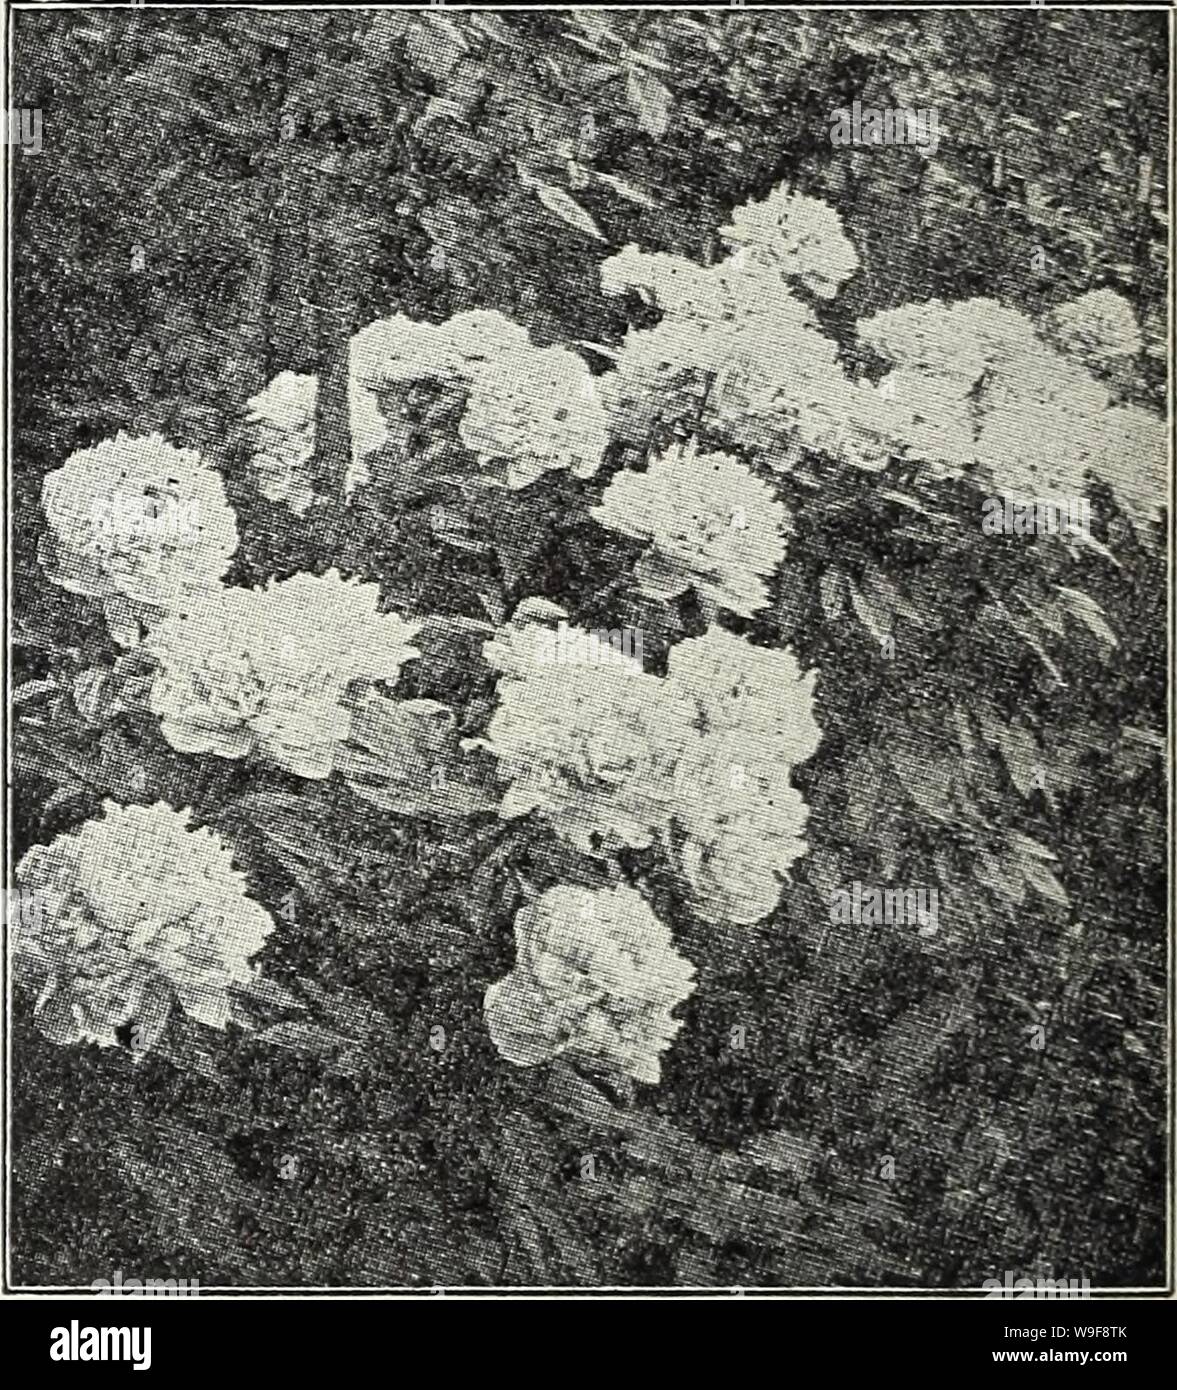 Archive image from page 23 of Currie's bulbs and plants . Currie's bulbs and plants : autumn 1928  curriesbulbsplan19curr Year: 1928 ( Shasta Daisy SHASTA DAISY A very attractive hardy plant, producing large white flowers profuselv through- out the summer months. Price, each, 25c; per dozen, ;. . . . ... $ 2.50 TRADESCANTIA (Spider Wort) Virgrinica — Produces a succession of blue flowers all summer. Price, each 25c- per dozen, 2.50 TUNICA Saxifraga — A pretty tufted plant with light pink flowers. 1 foot. Price, each. 25c: per dozen o5q AALERIANA (Hardy Garden Heliotrope) Officinalis — Bears he Stock Photo